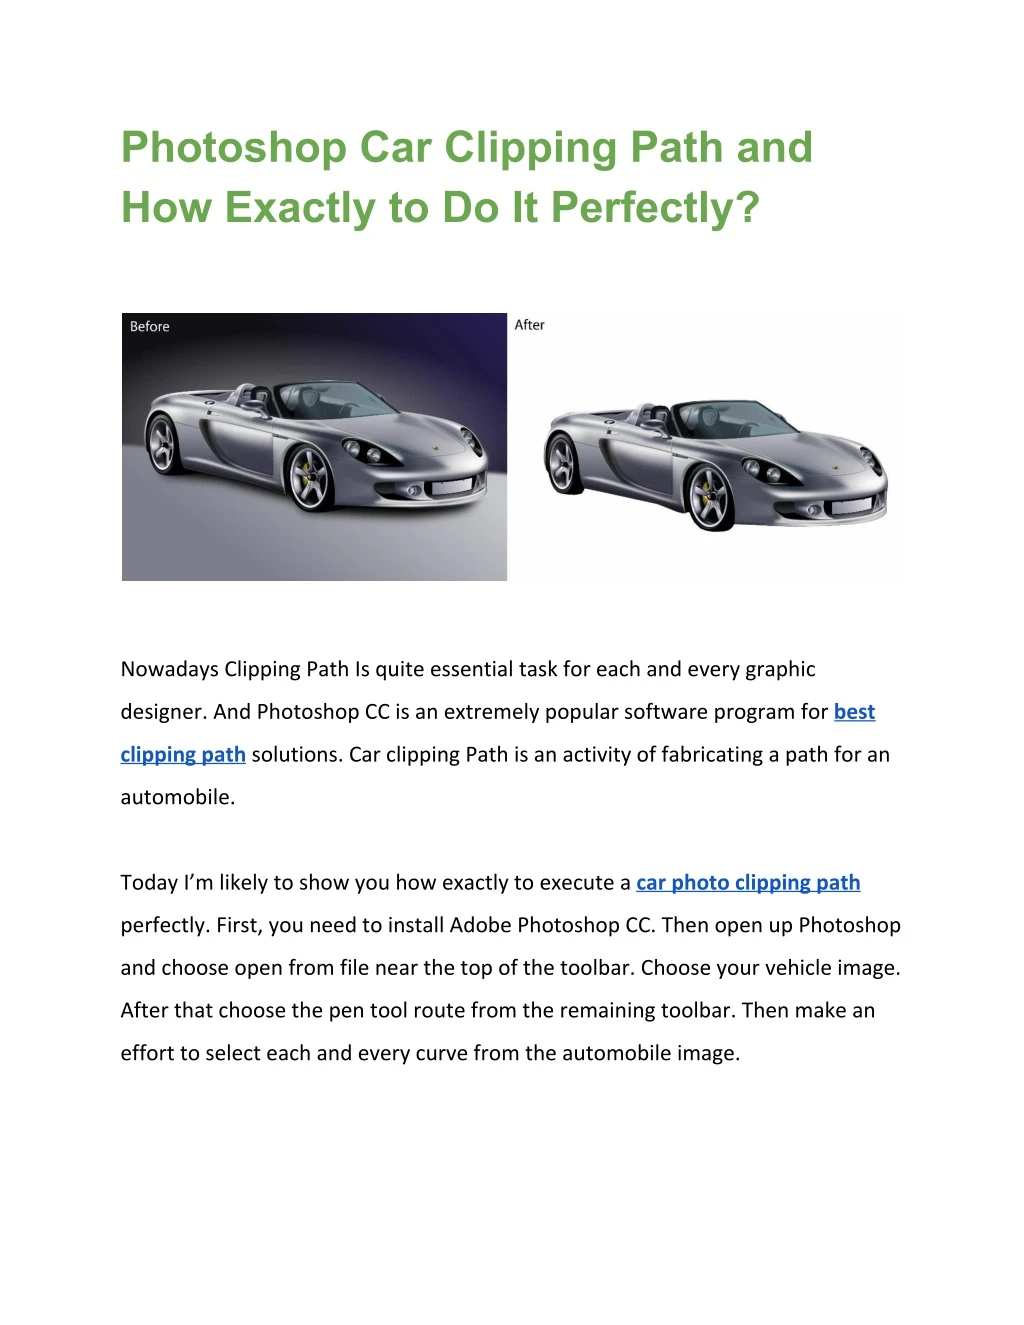 photoshop car clipping path and how exactly